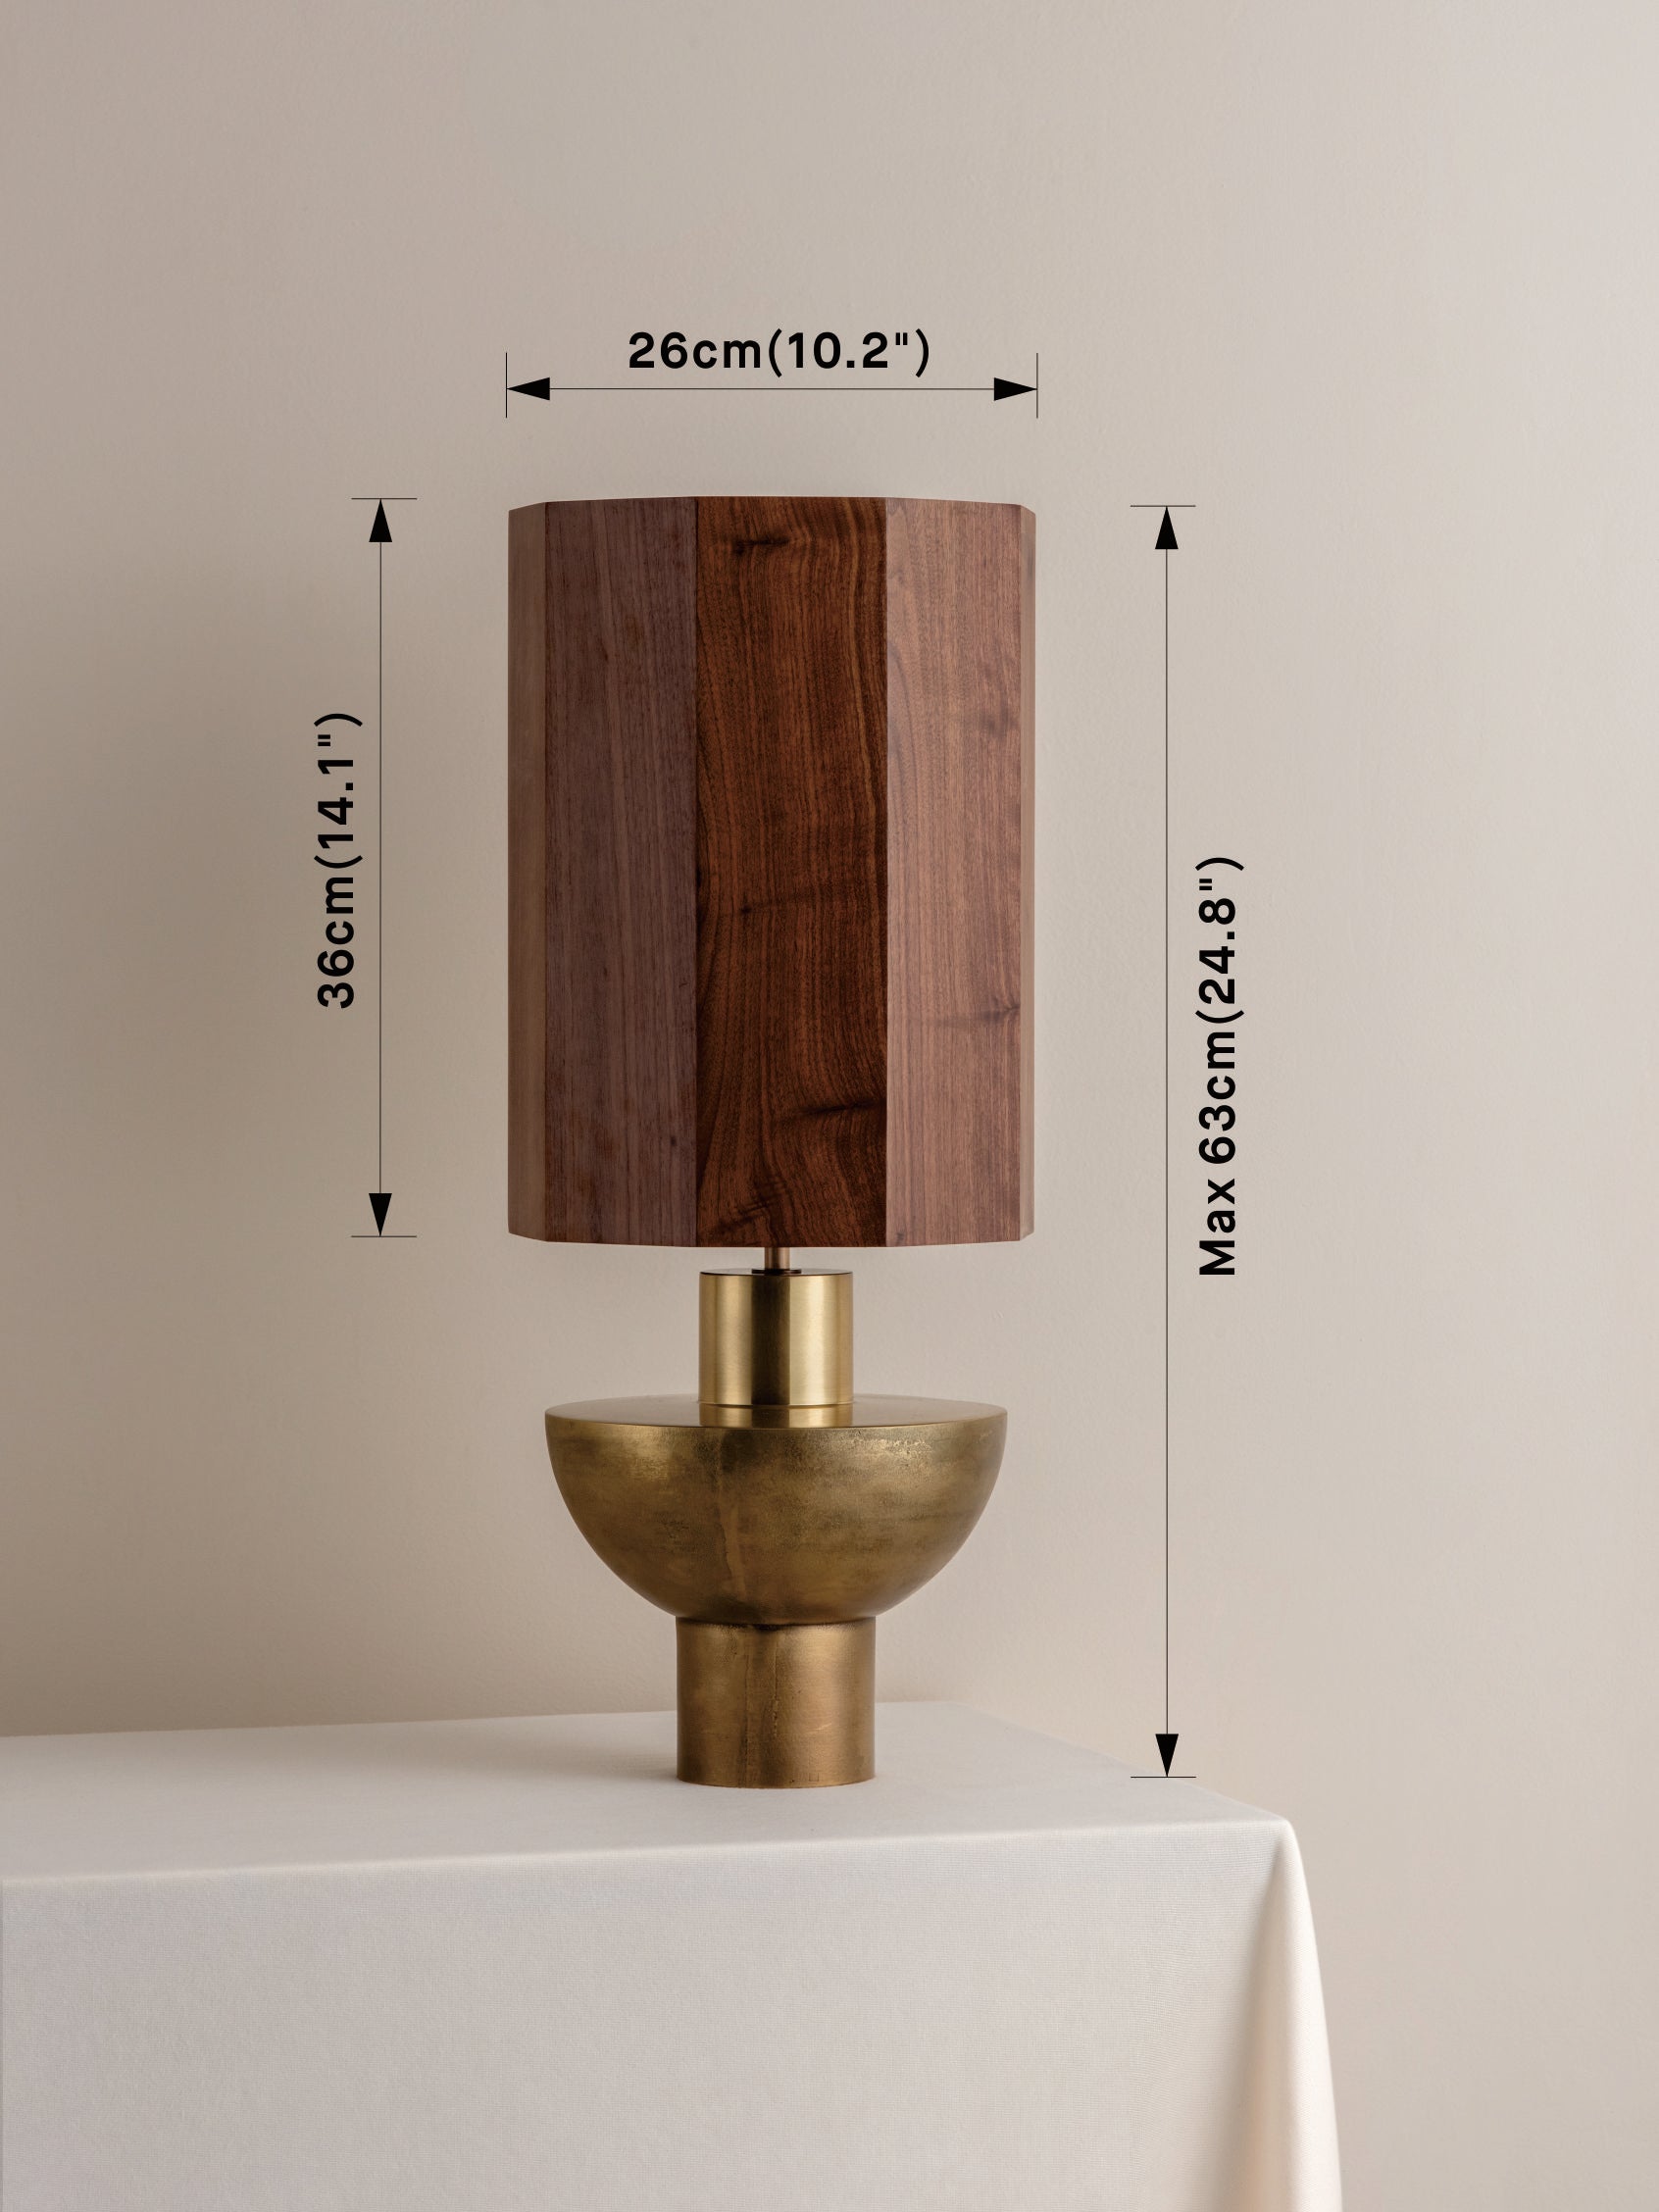 Editions brass lamp with + walnut wood shade | Table Lamp | Lights & Lamps | UK | Modern Affordable Designer Lighting